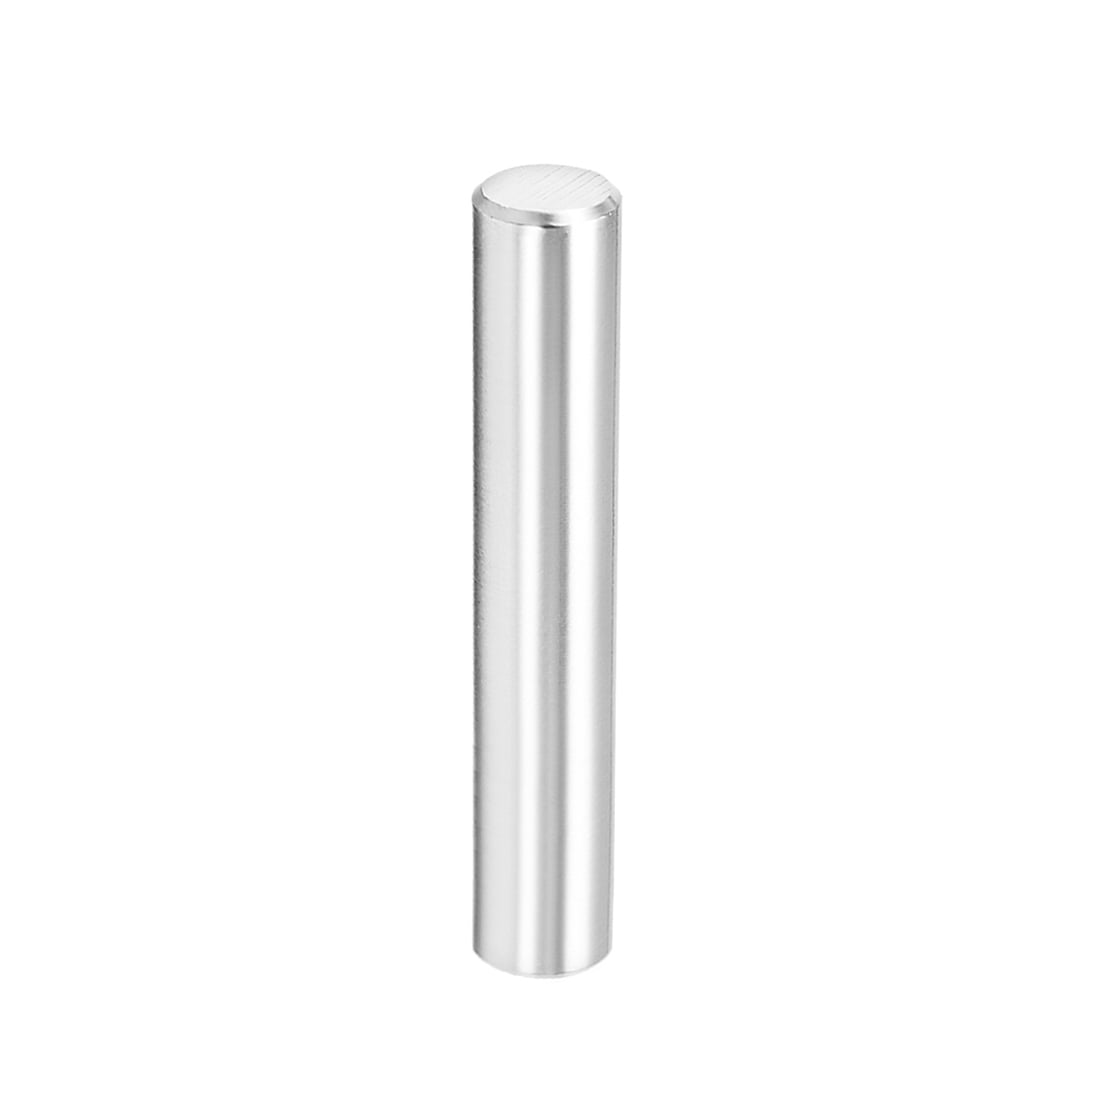 Details about   12mm X 45mm Dowel Pin 304 Stainless Steel Cylindrical Shelf Support Pin 